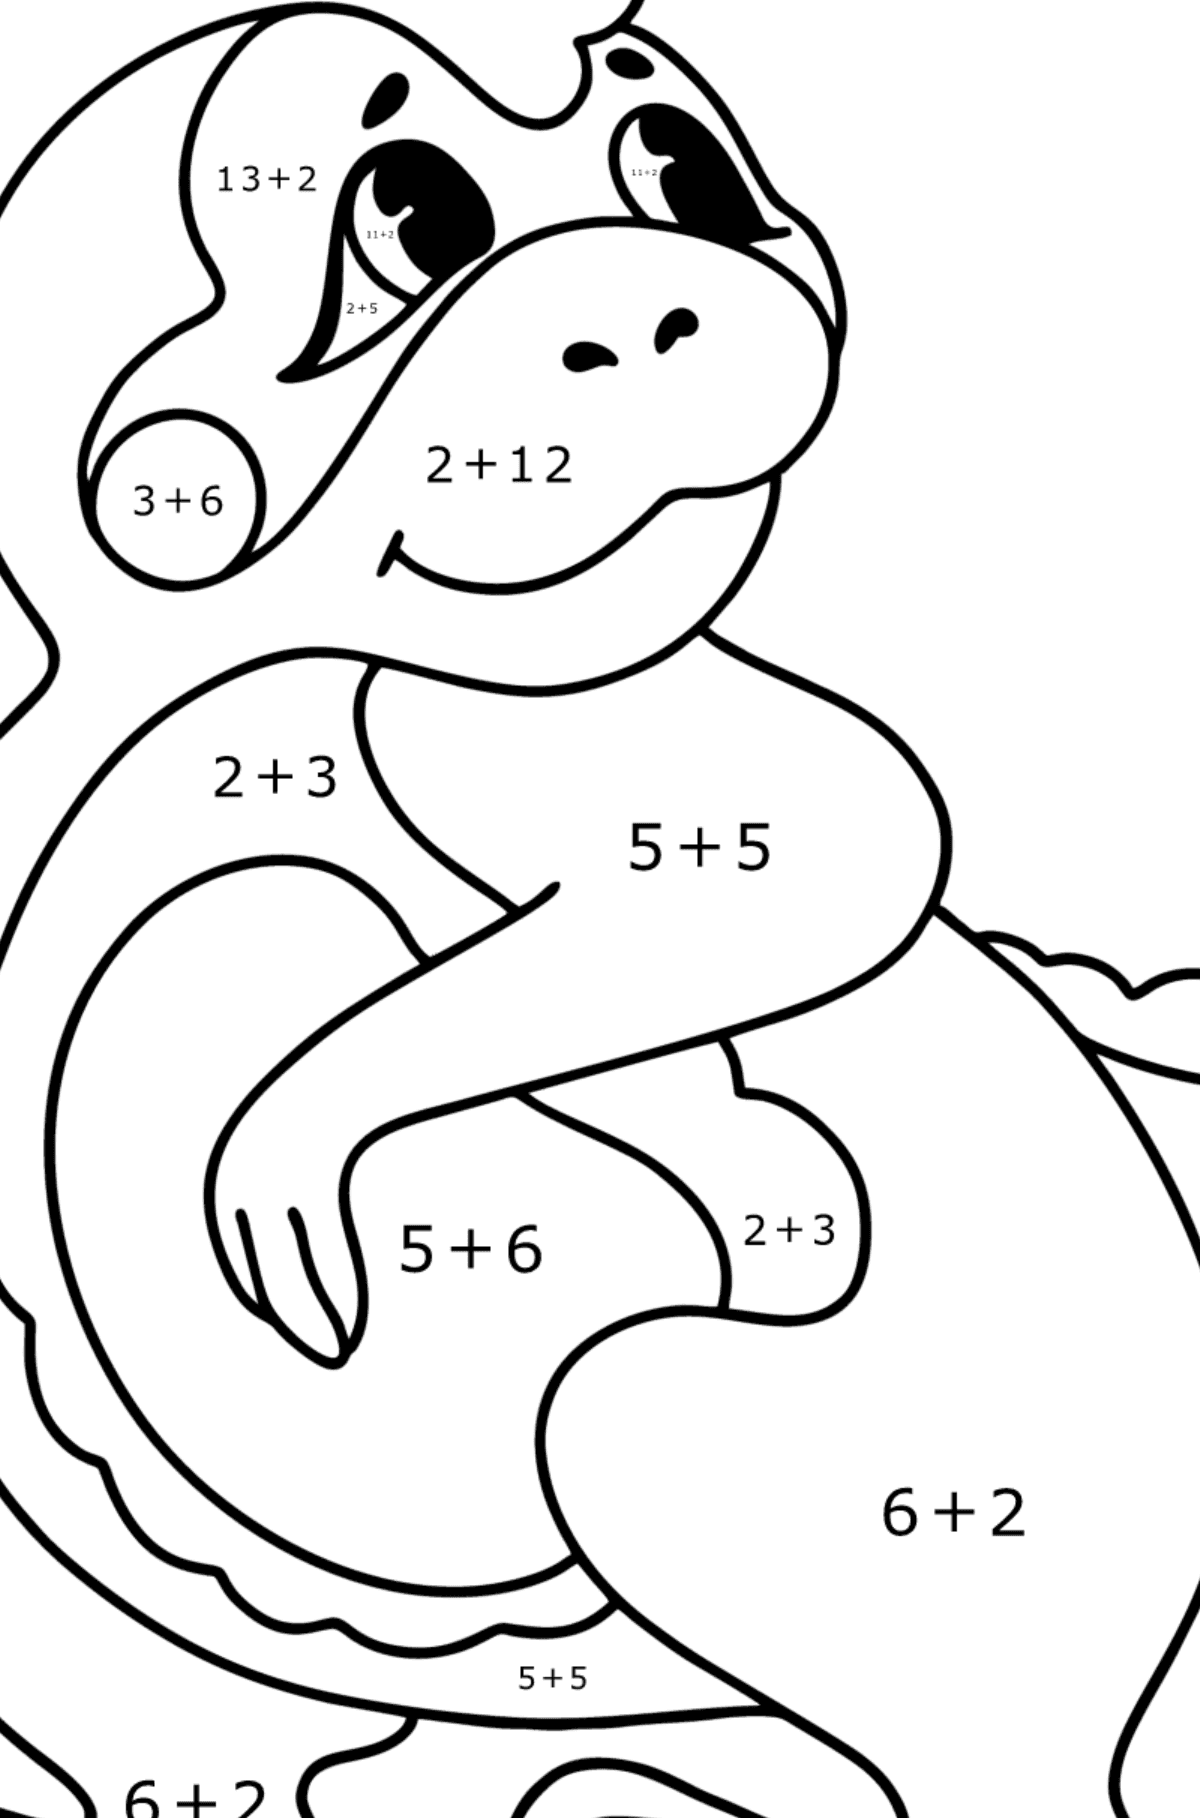 Baby dragon coloring page - Math Coloring - Addition for Kids